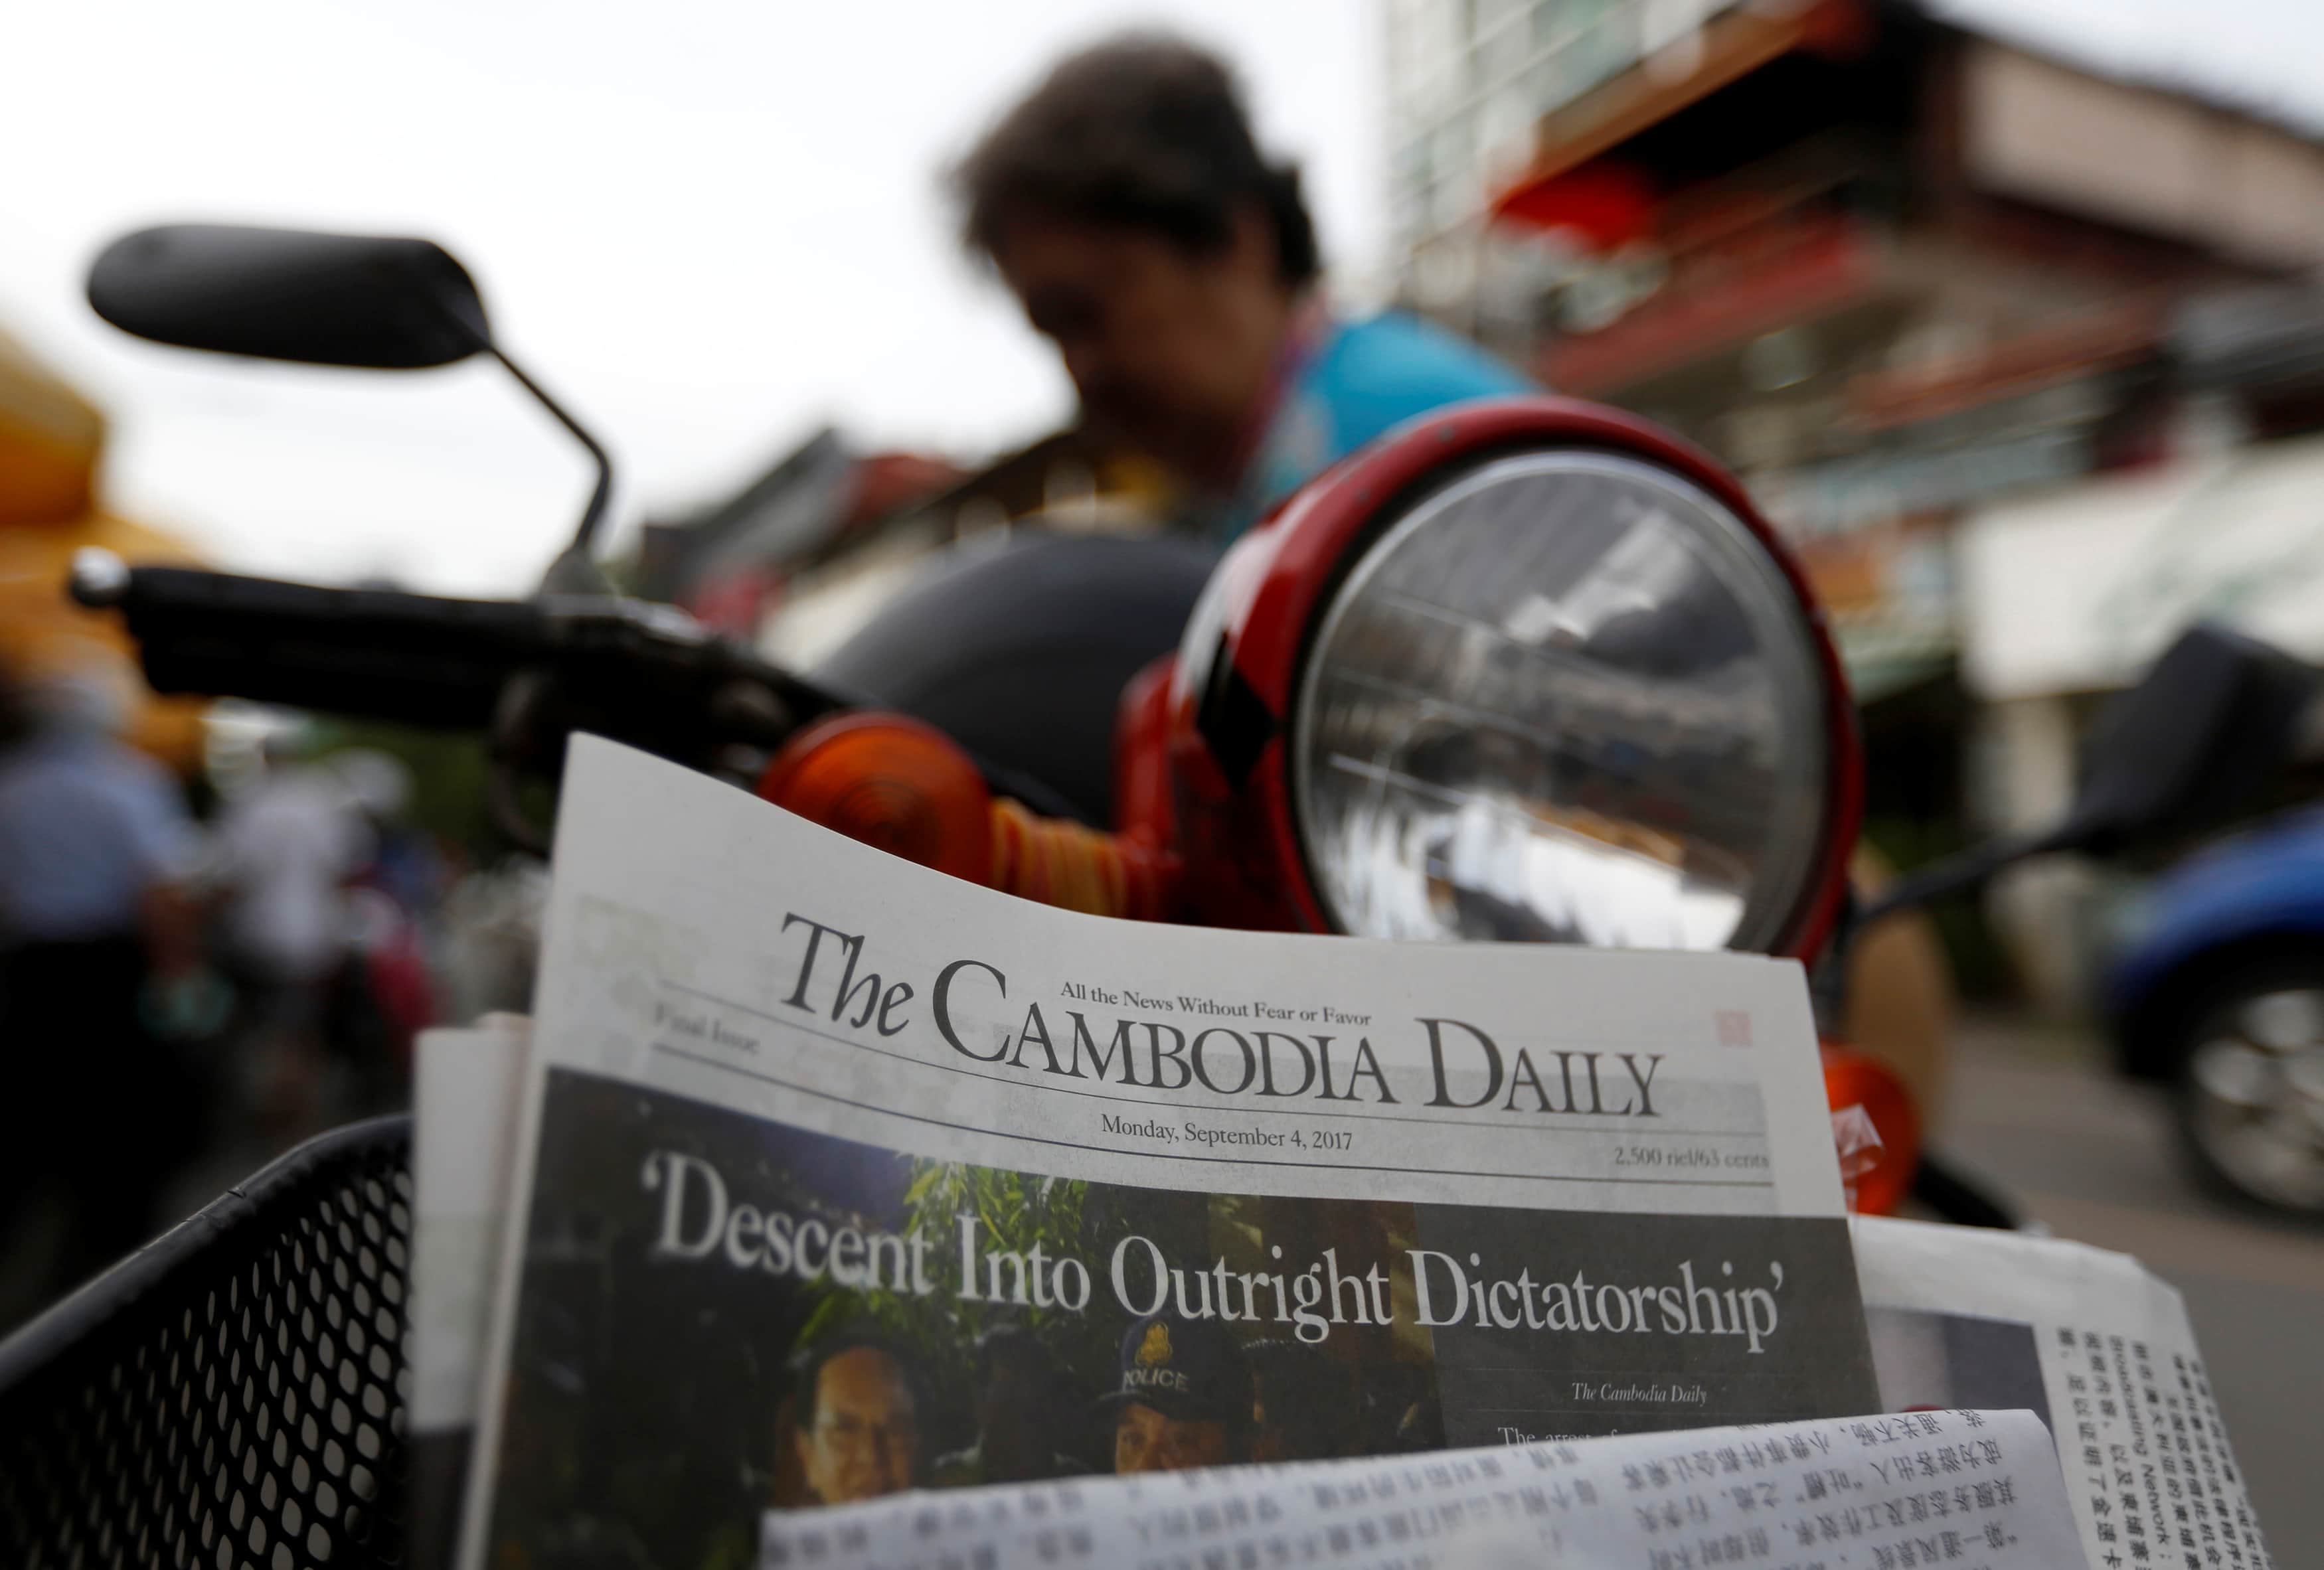 A woman buys the final issue of The Cambodia Daily newspaper at a store along a street in Phnom Penh, Cambodia, September 4, 2017. , REUTERS/Samrang Pring